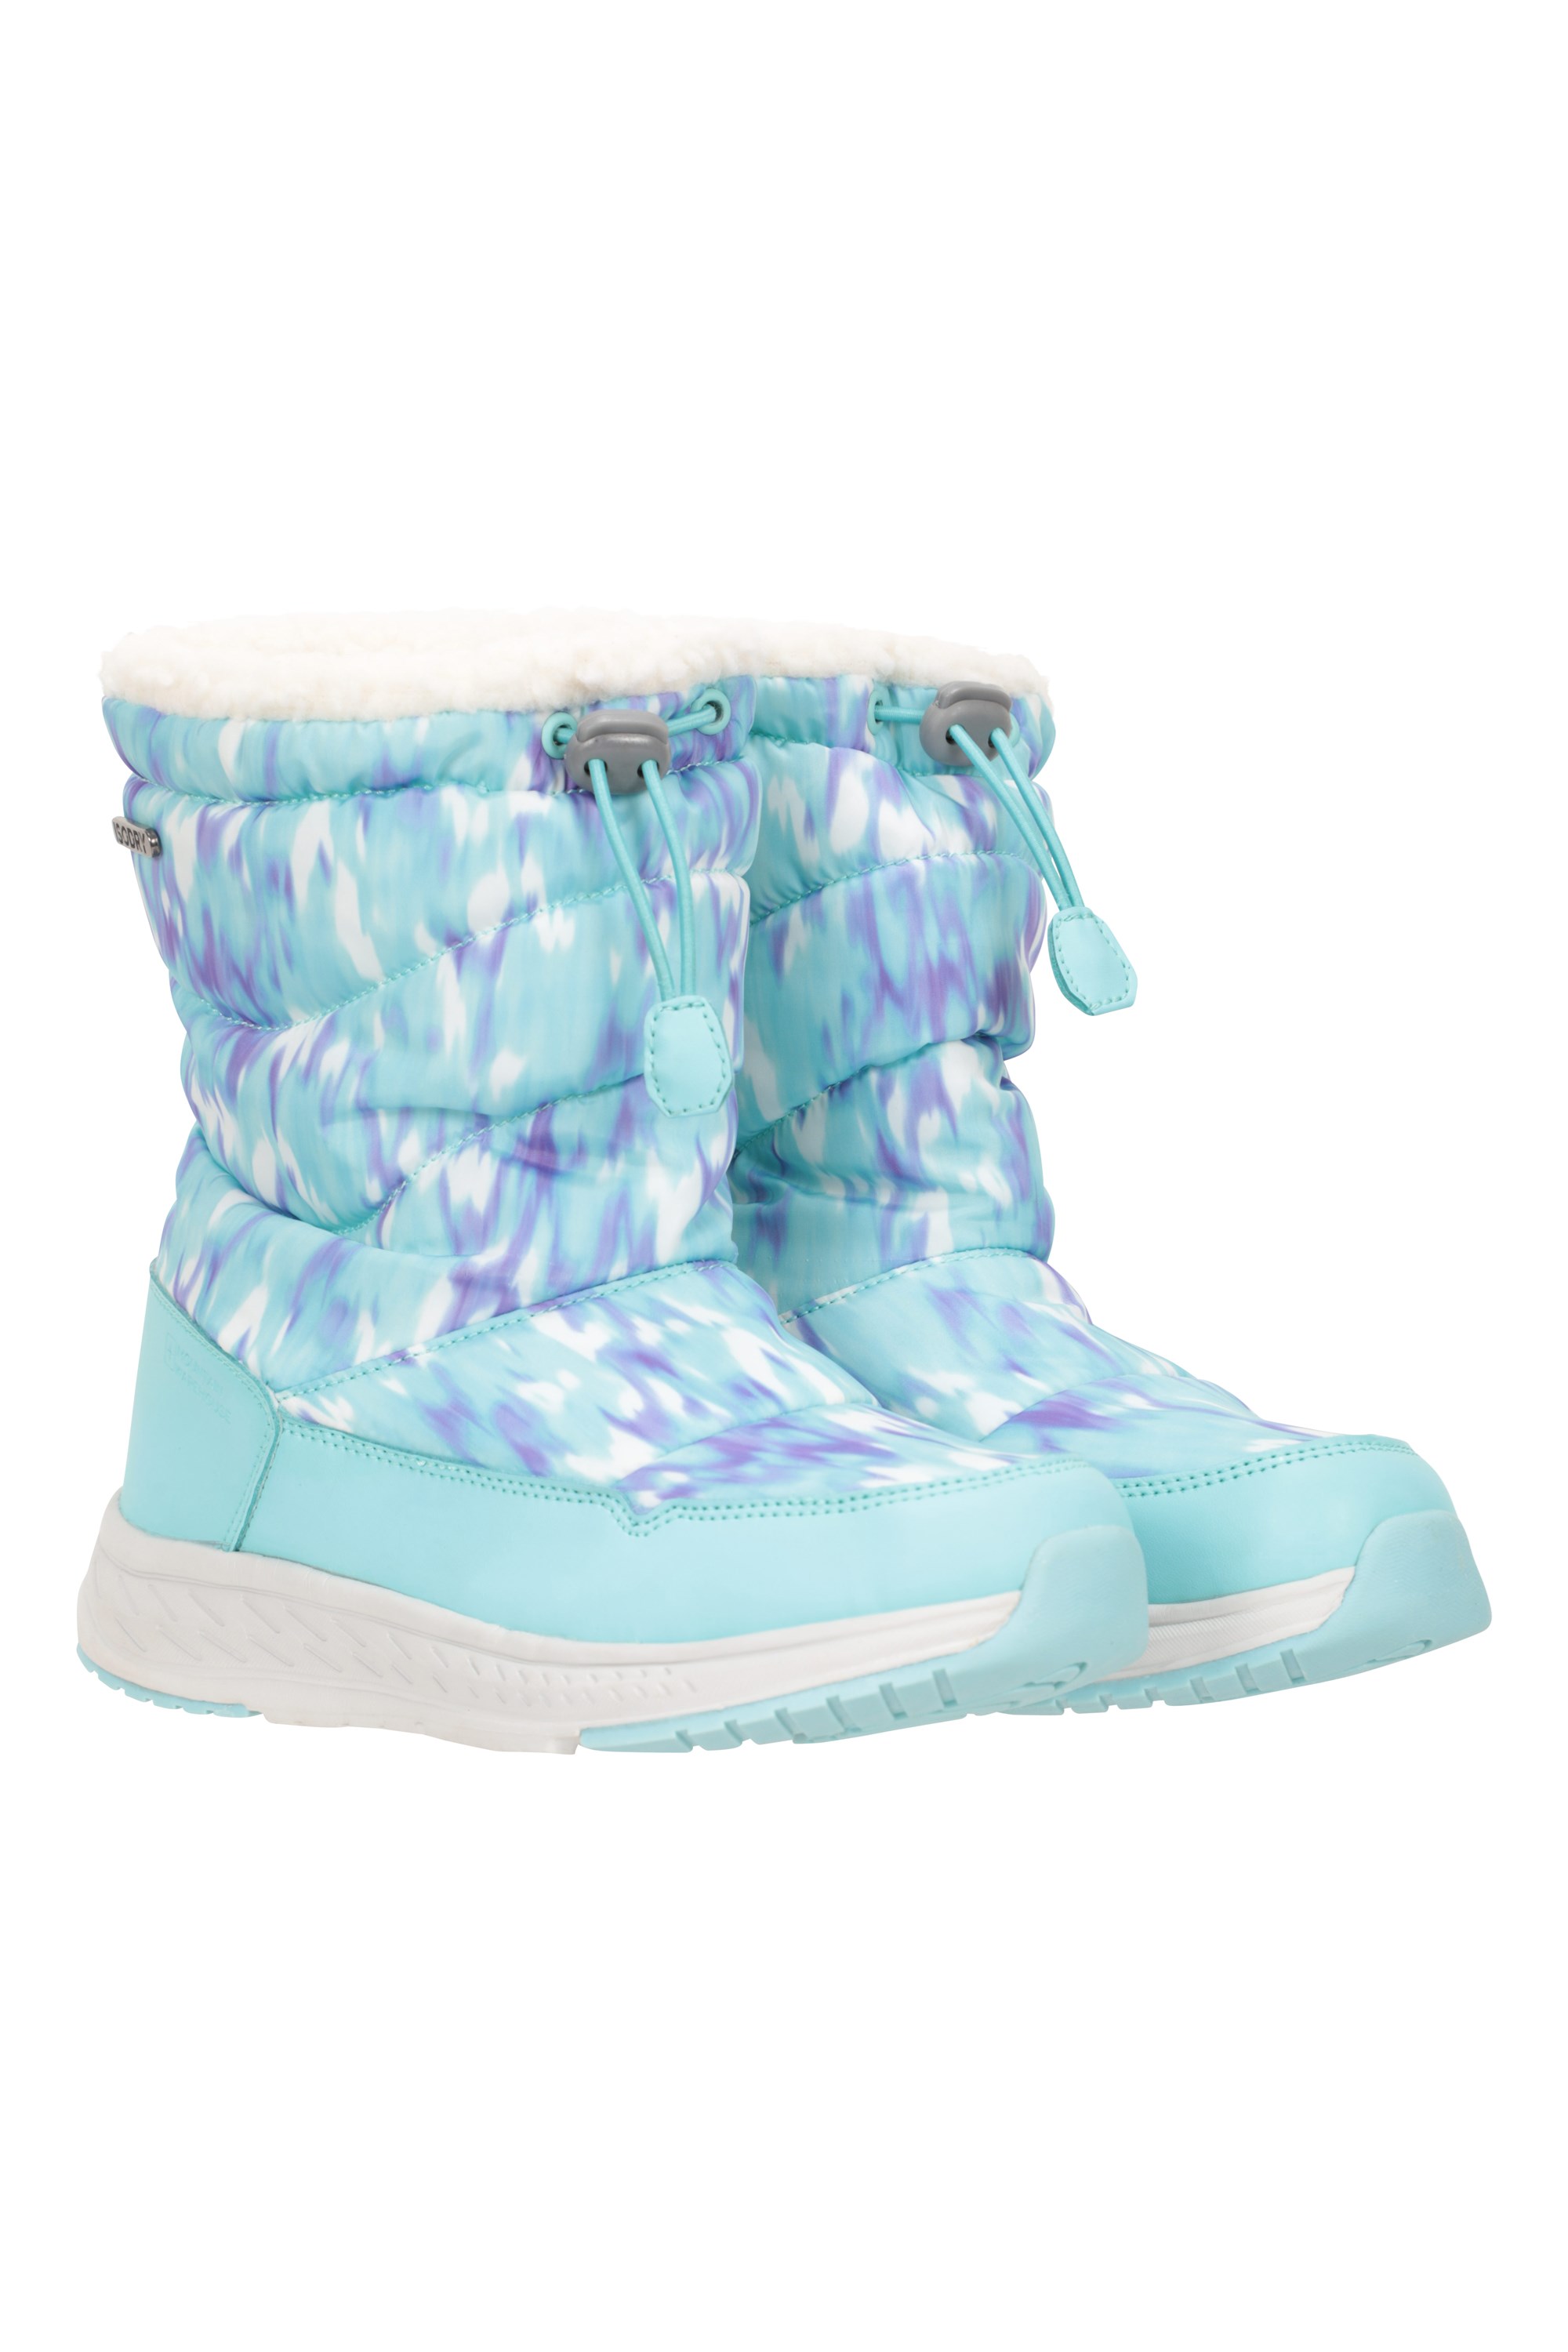 Glide Kids Adaptive Printed Snow Boots - Blue